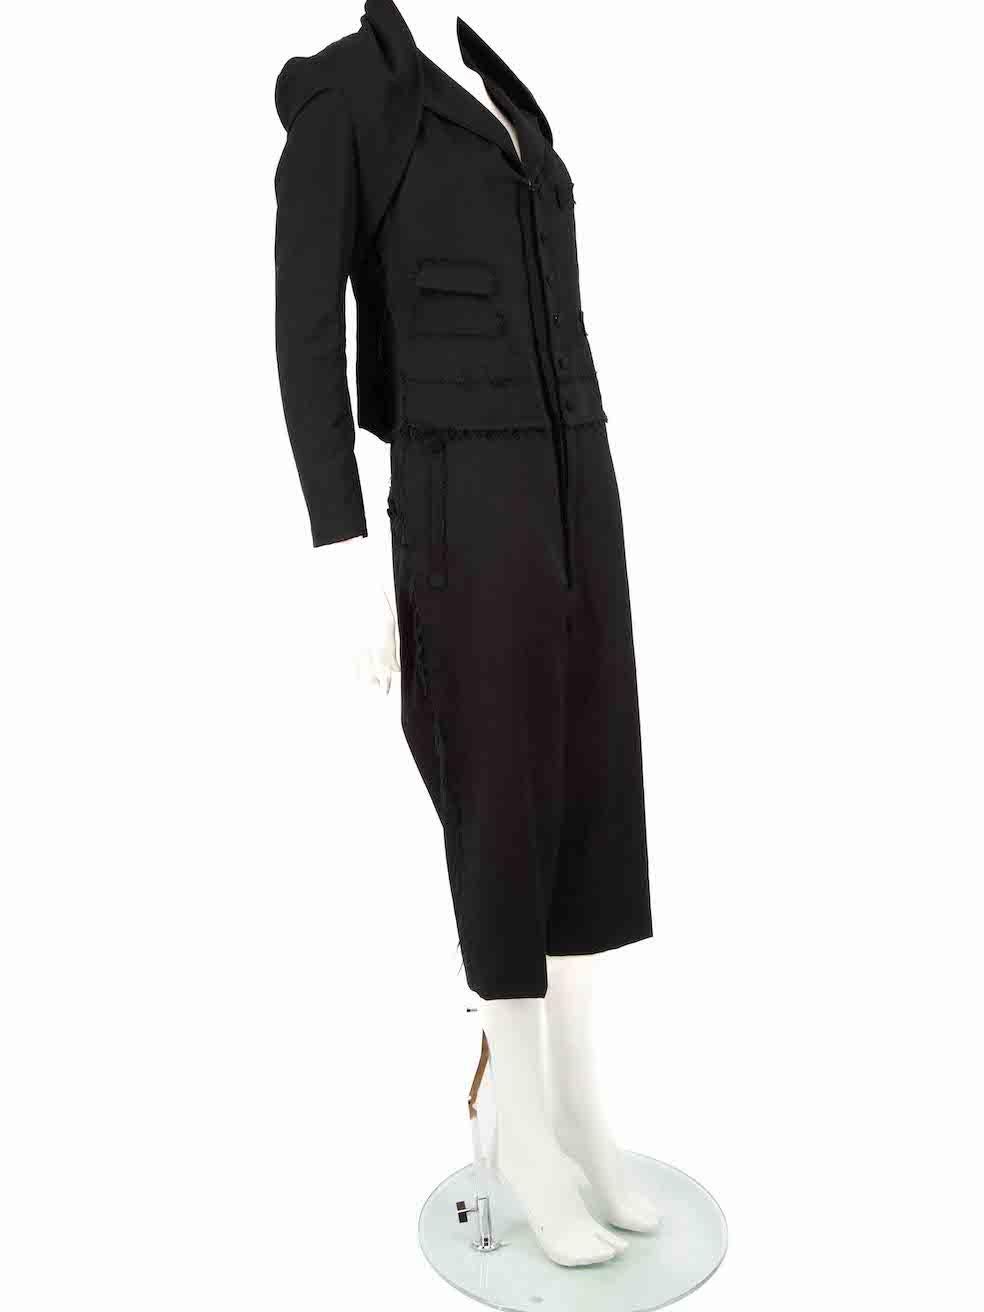 CONDITION is Very good. Hardly any visible wear to set is evident on this used Yohji Yamamoto designer resale item. Please note this jumpsuit is purposely distressed.
 
 
 
 Details
 
 
 Black
 
 Wool
 
 Jumpsuit and jacket set
 
 Long sleeve